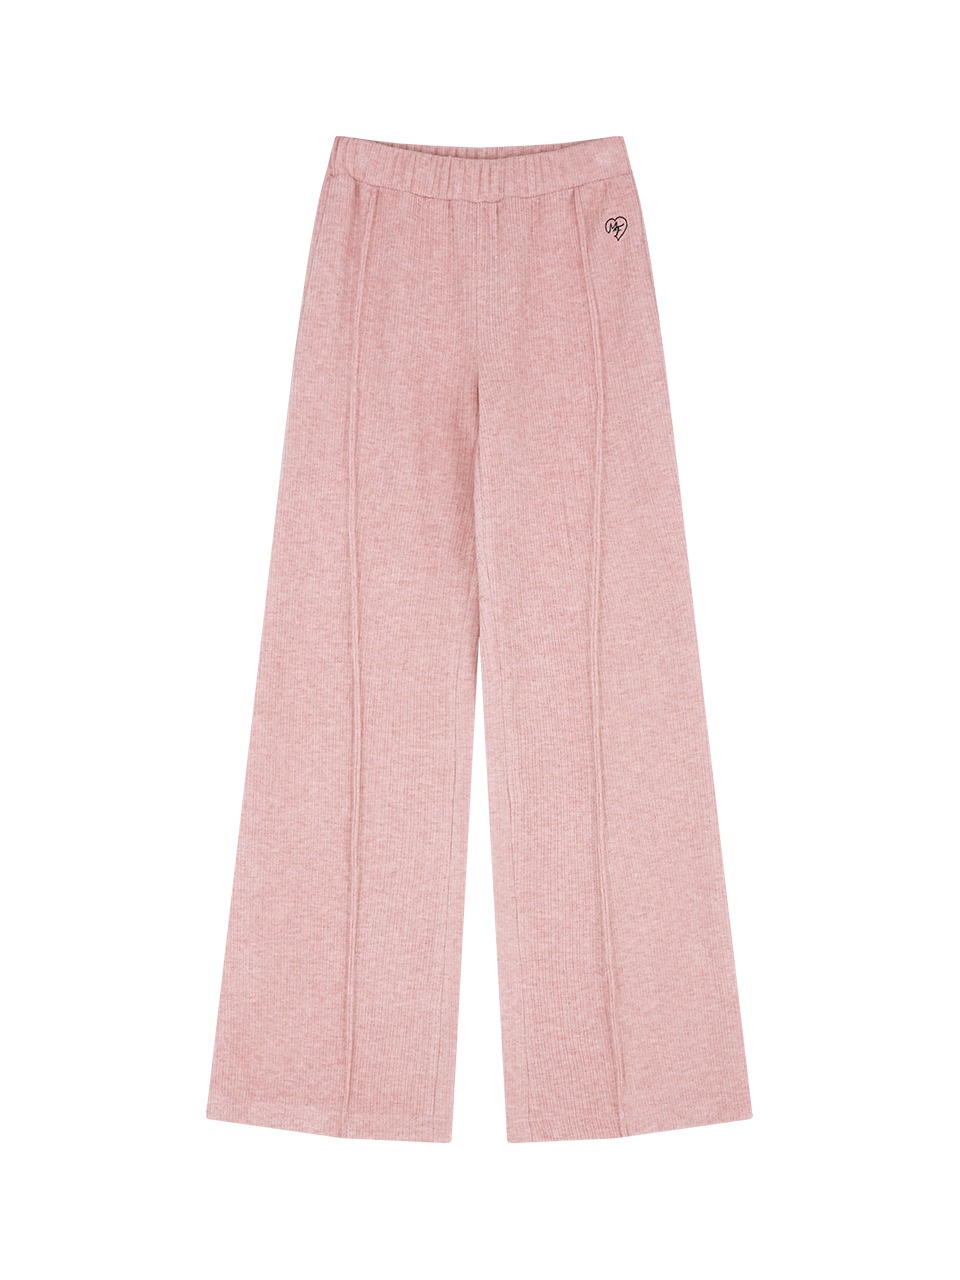 MAFING FLARE PANTS (PINK)